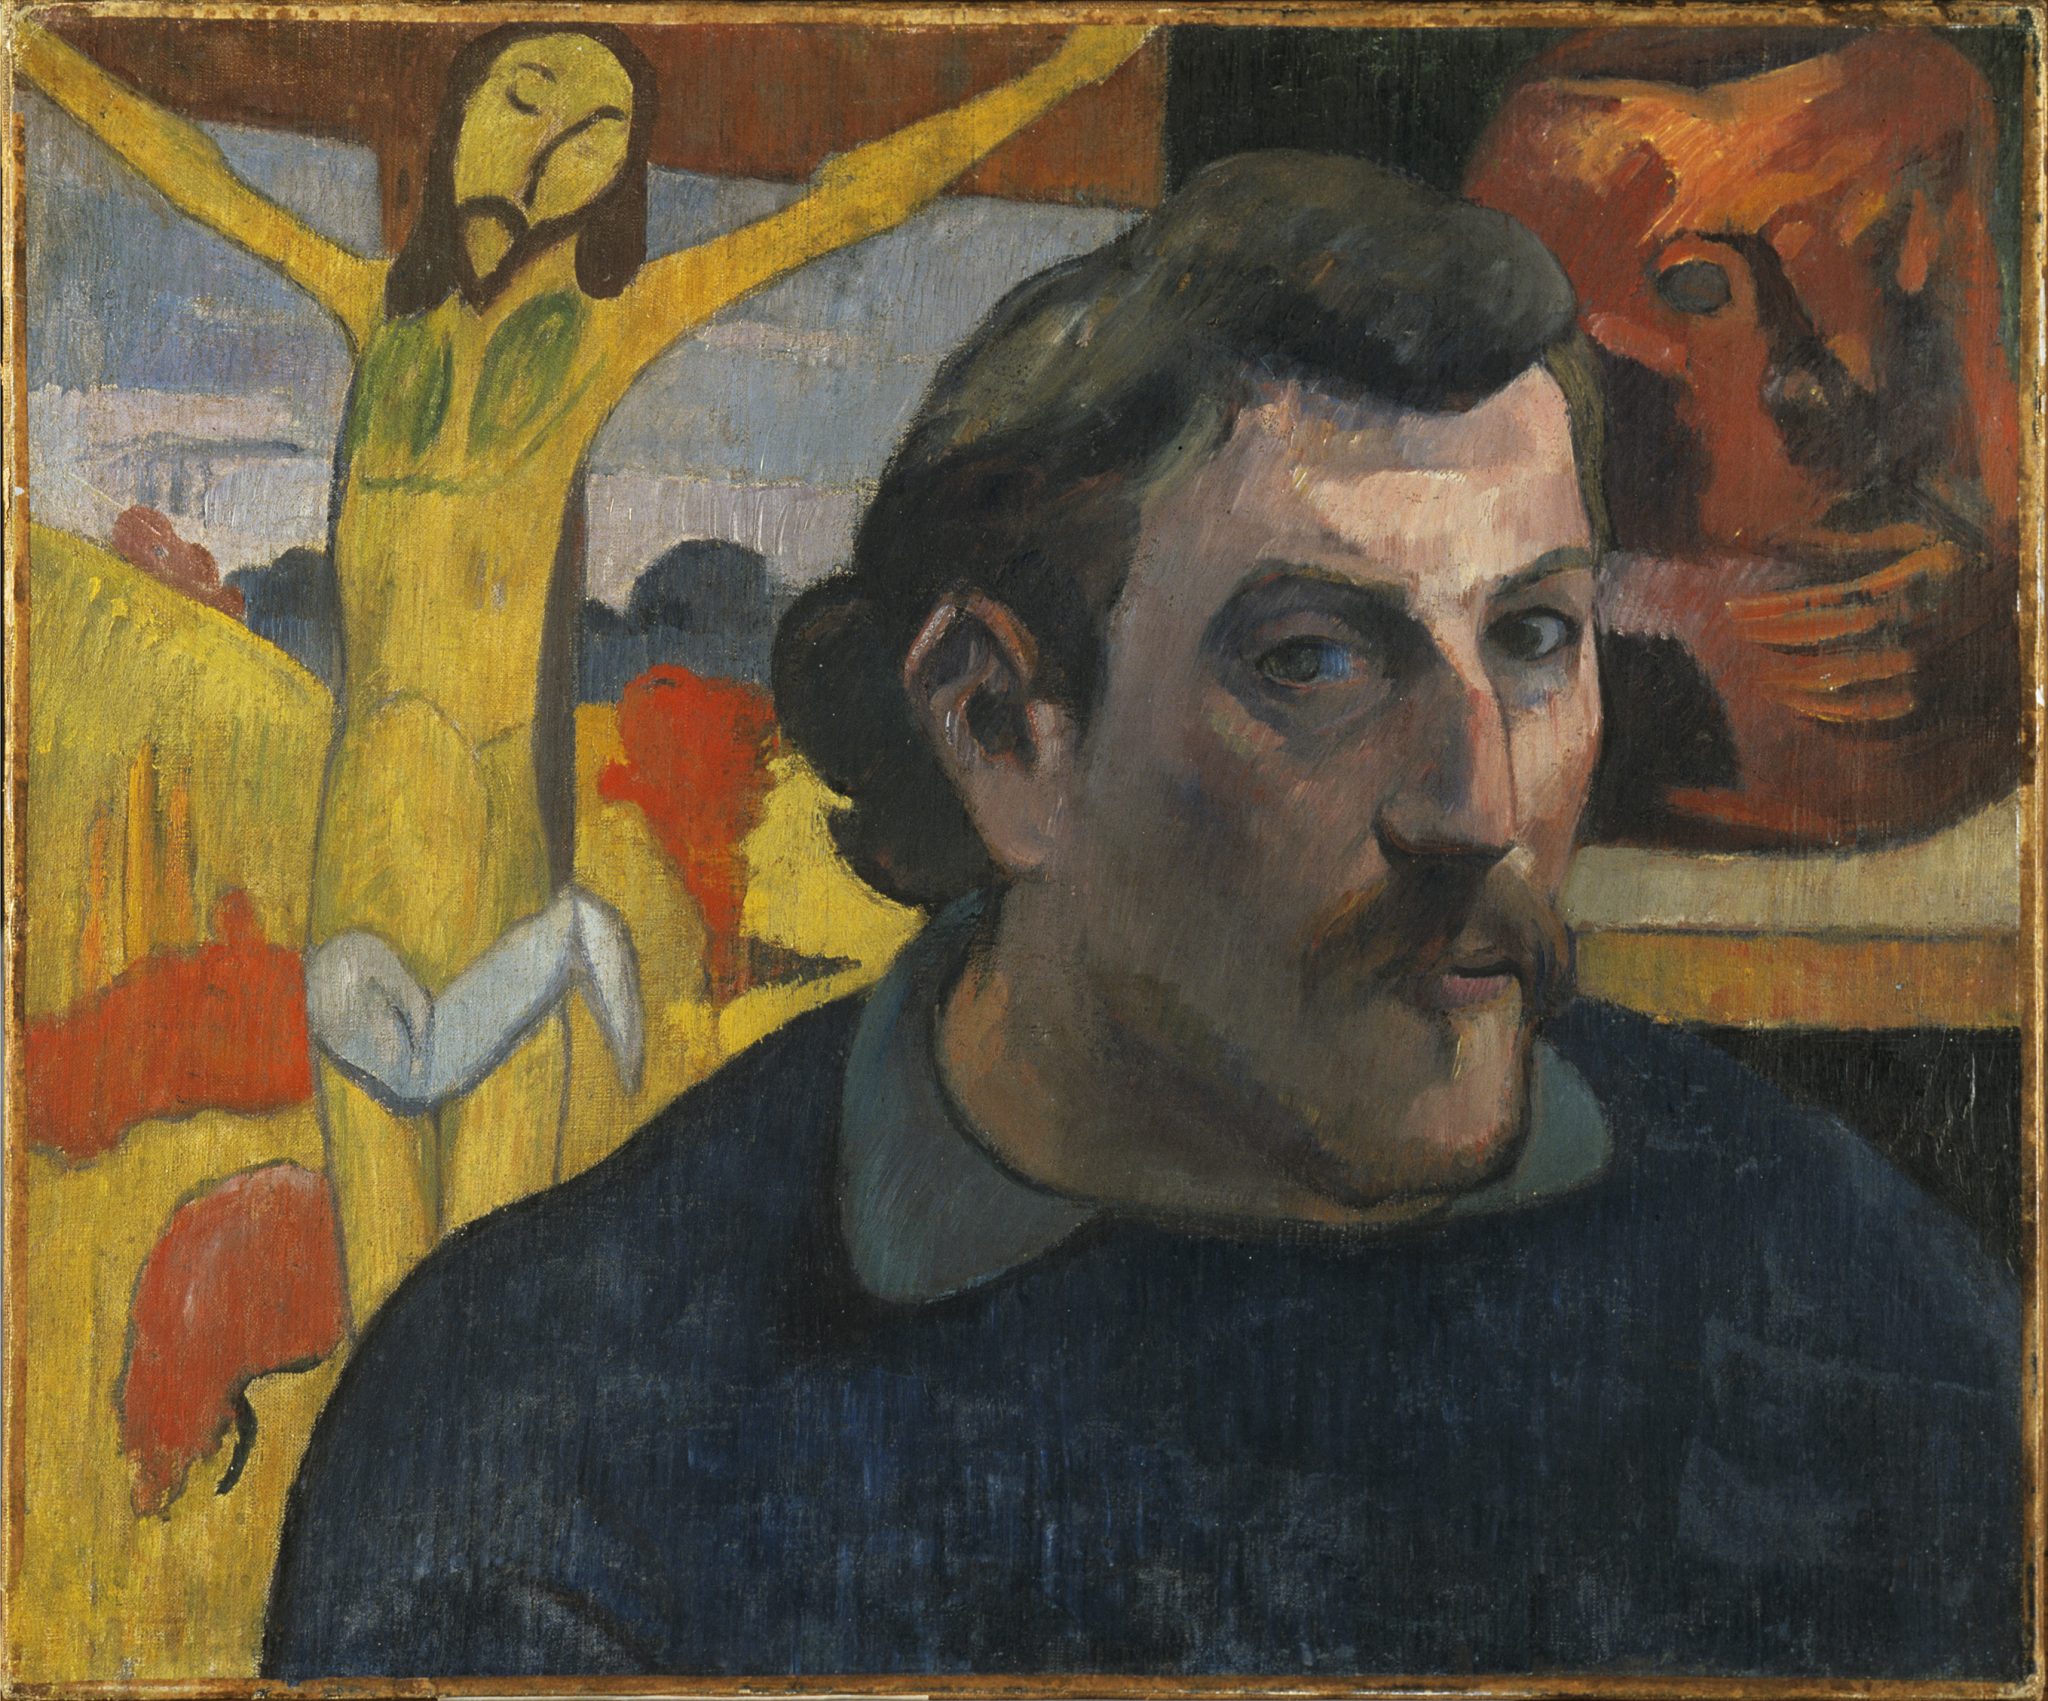 Paul Gauguin Self Portrait as Christ, 1890-1891 Oil on canvas 38.1 x 45.7 cm Musée d'Orsay, Paris Acquired by the Musées nationaux with the participation of Philippe Meyer and a Japanese patron, coordinated by the newspaper Nikkei, 1994 (RF 1994-2) (RF 1994 2) © RMN-Grand Palais (musée d'Orsay) / René-Gabriel Ojéda